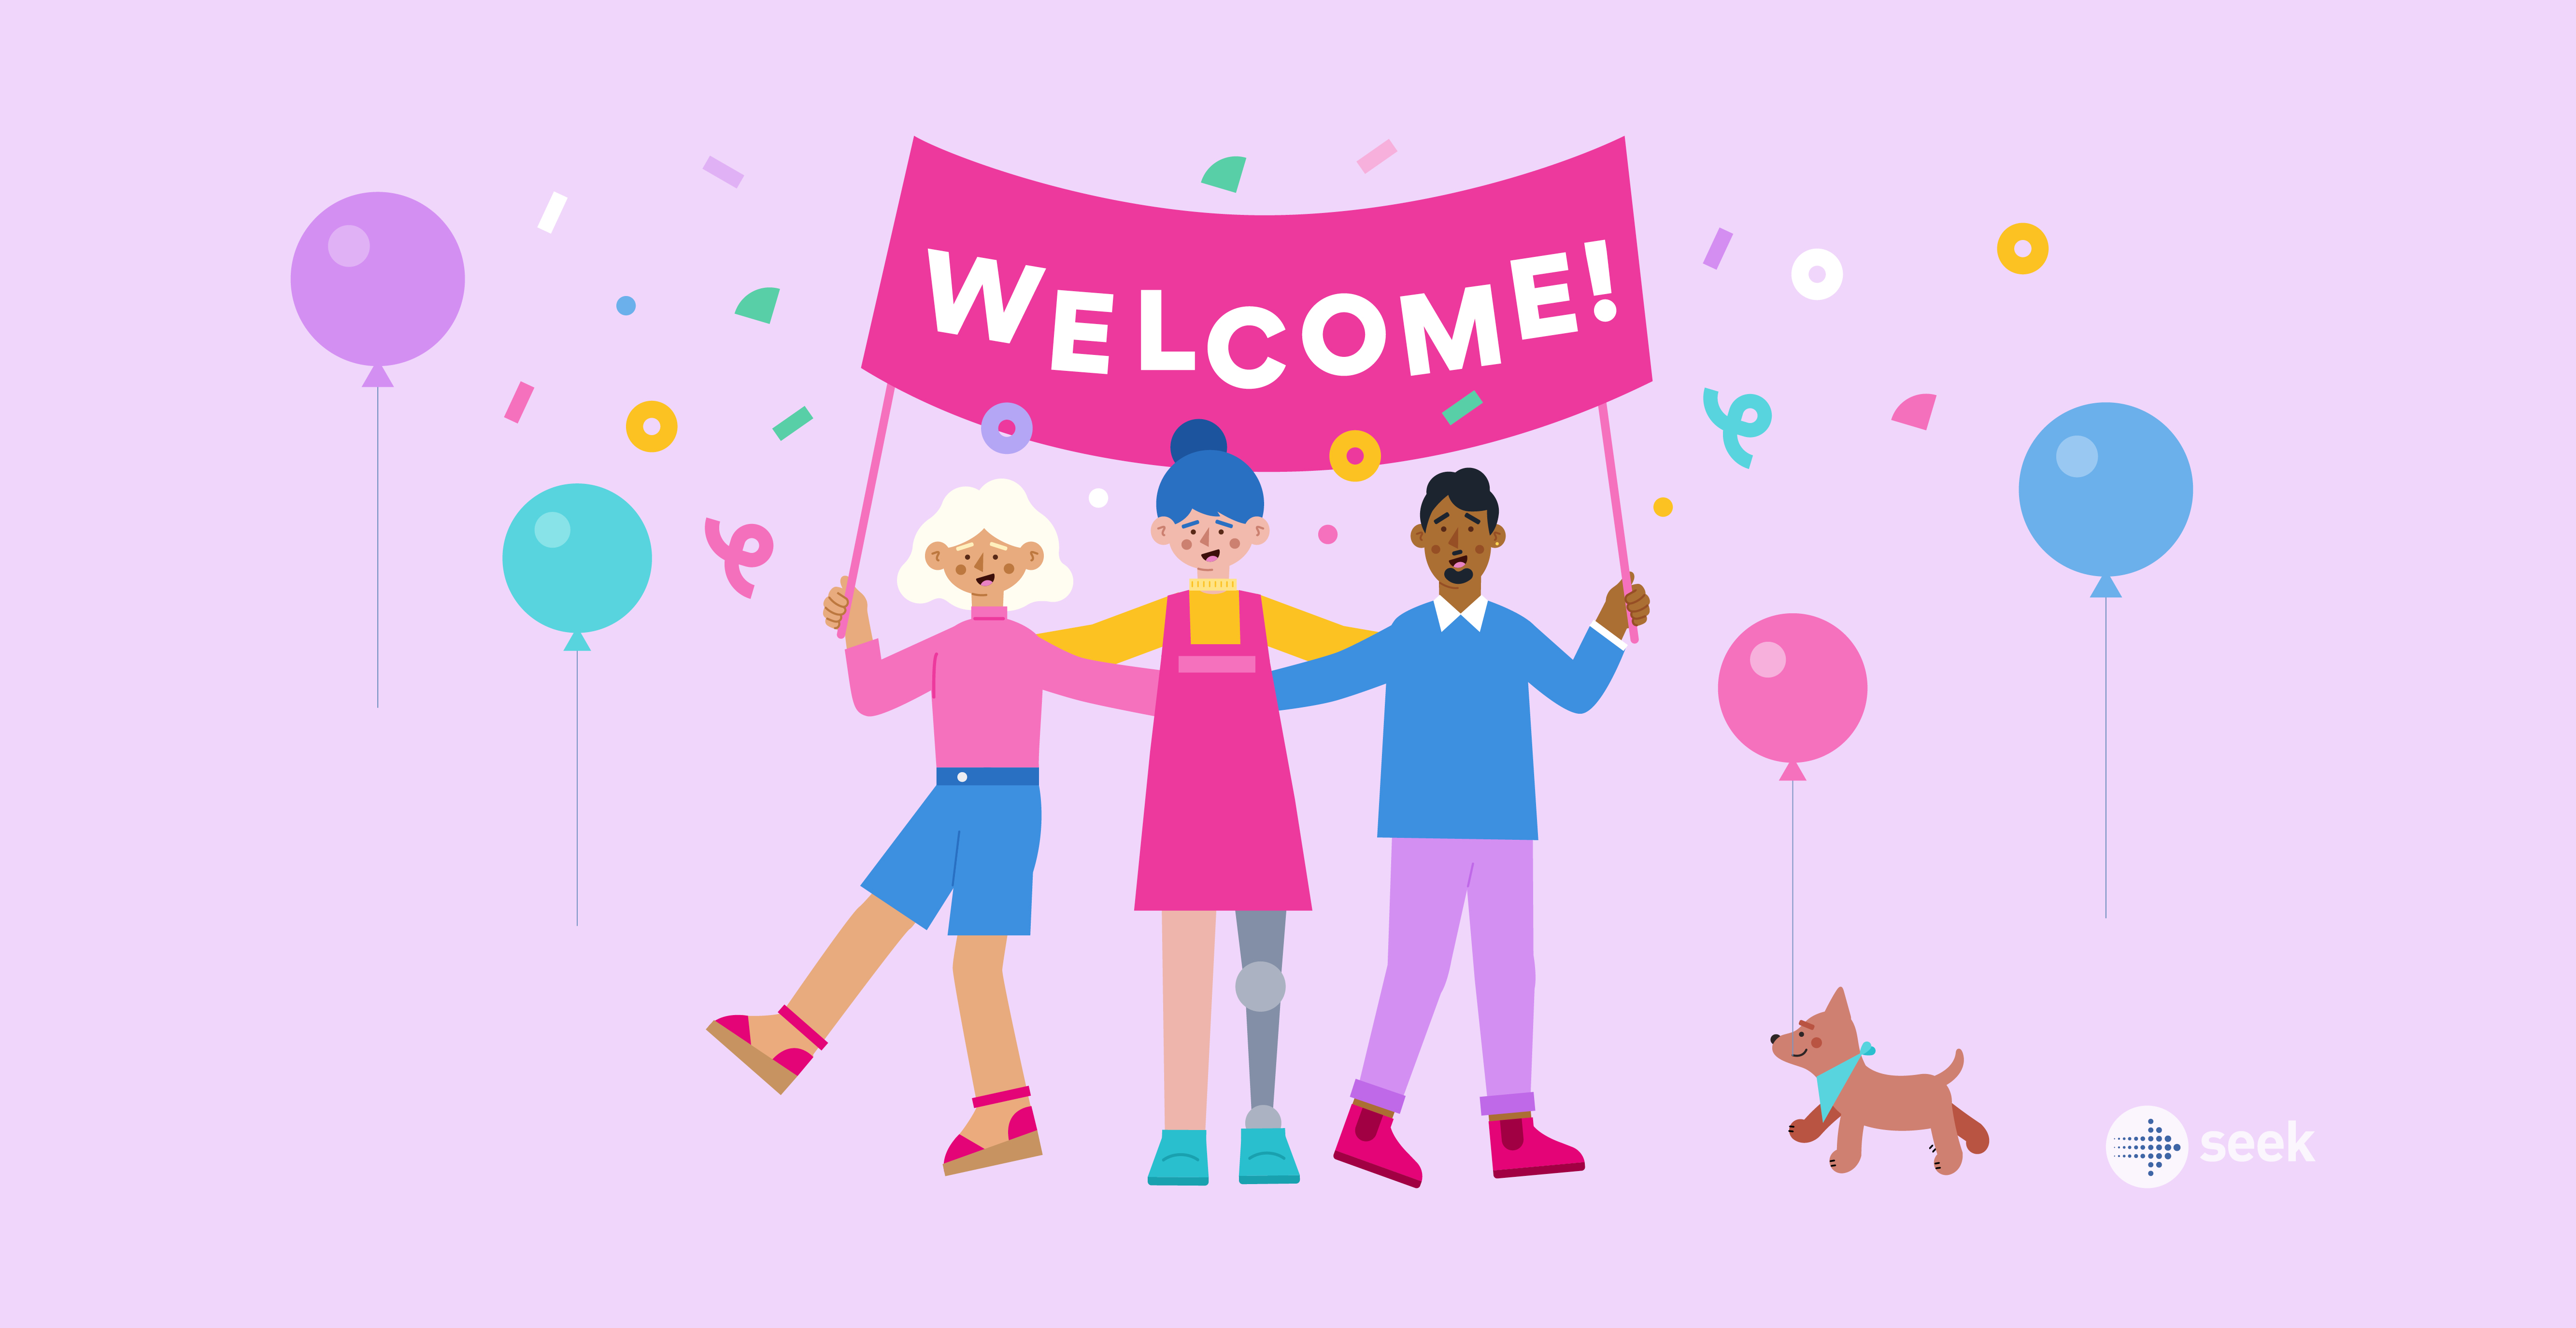 “Welcome to the team!” How to welcome a new team member (with examples)